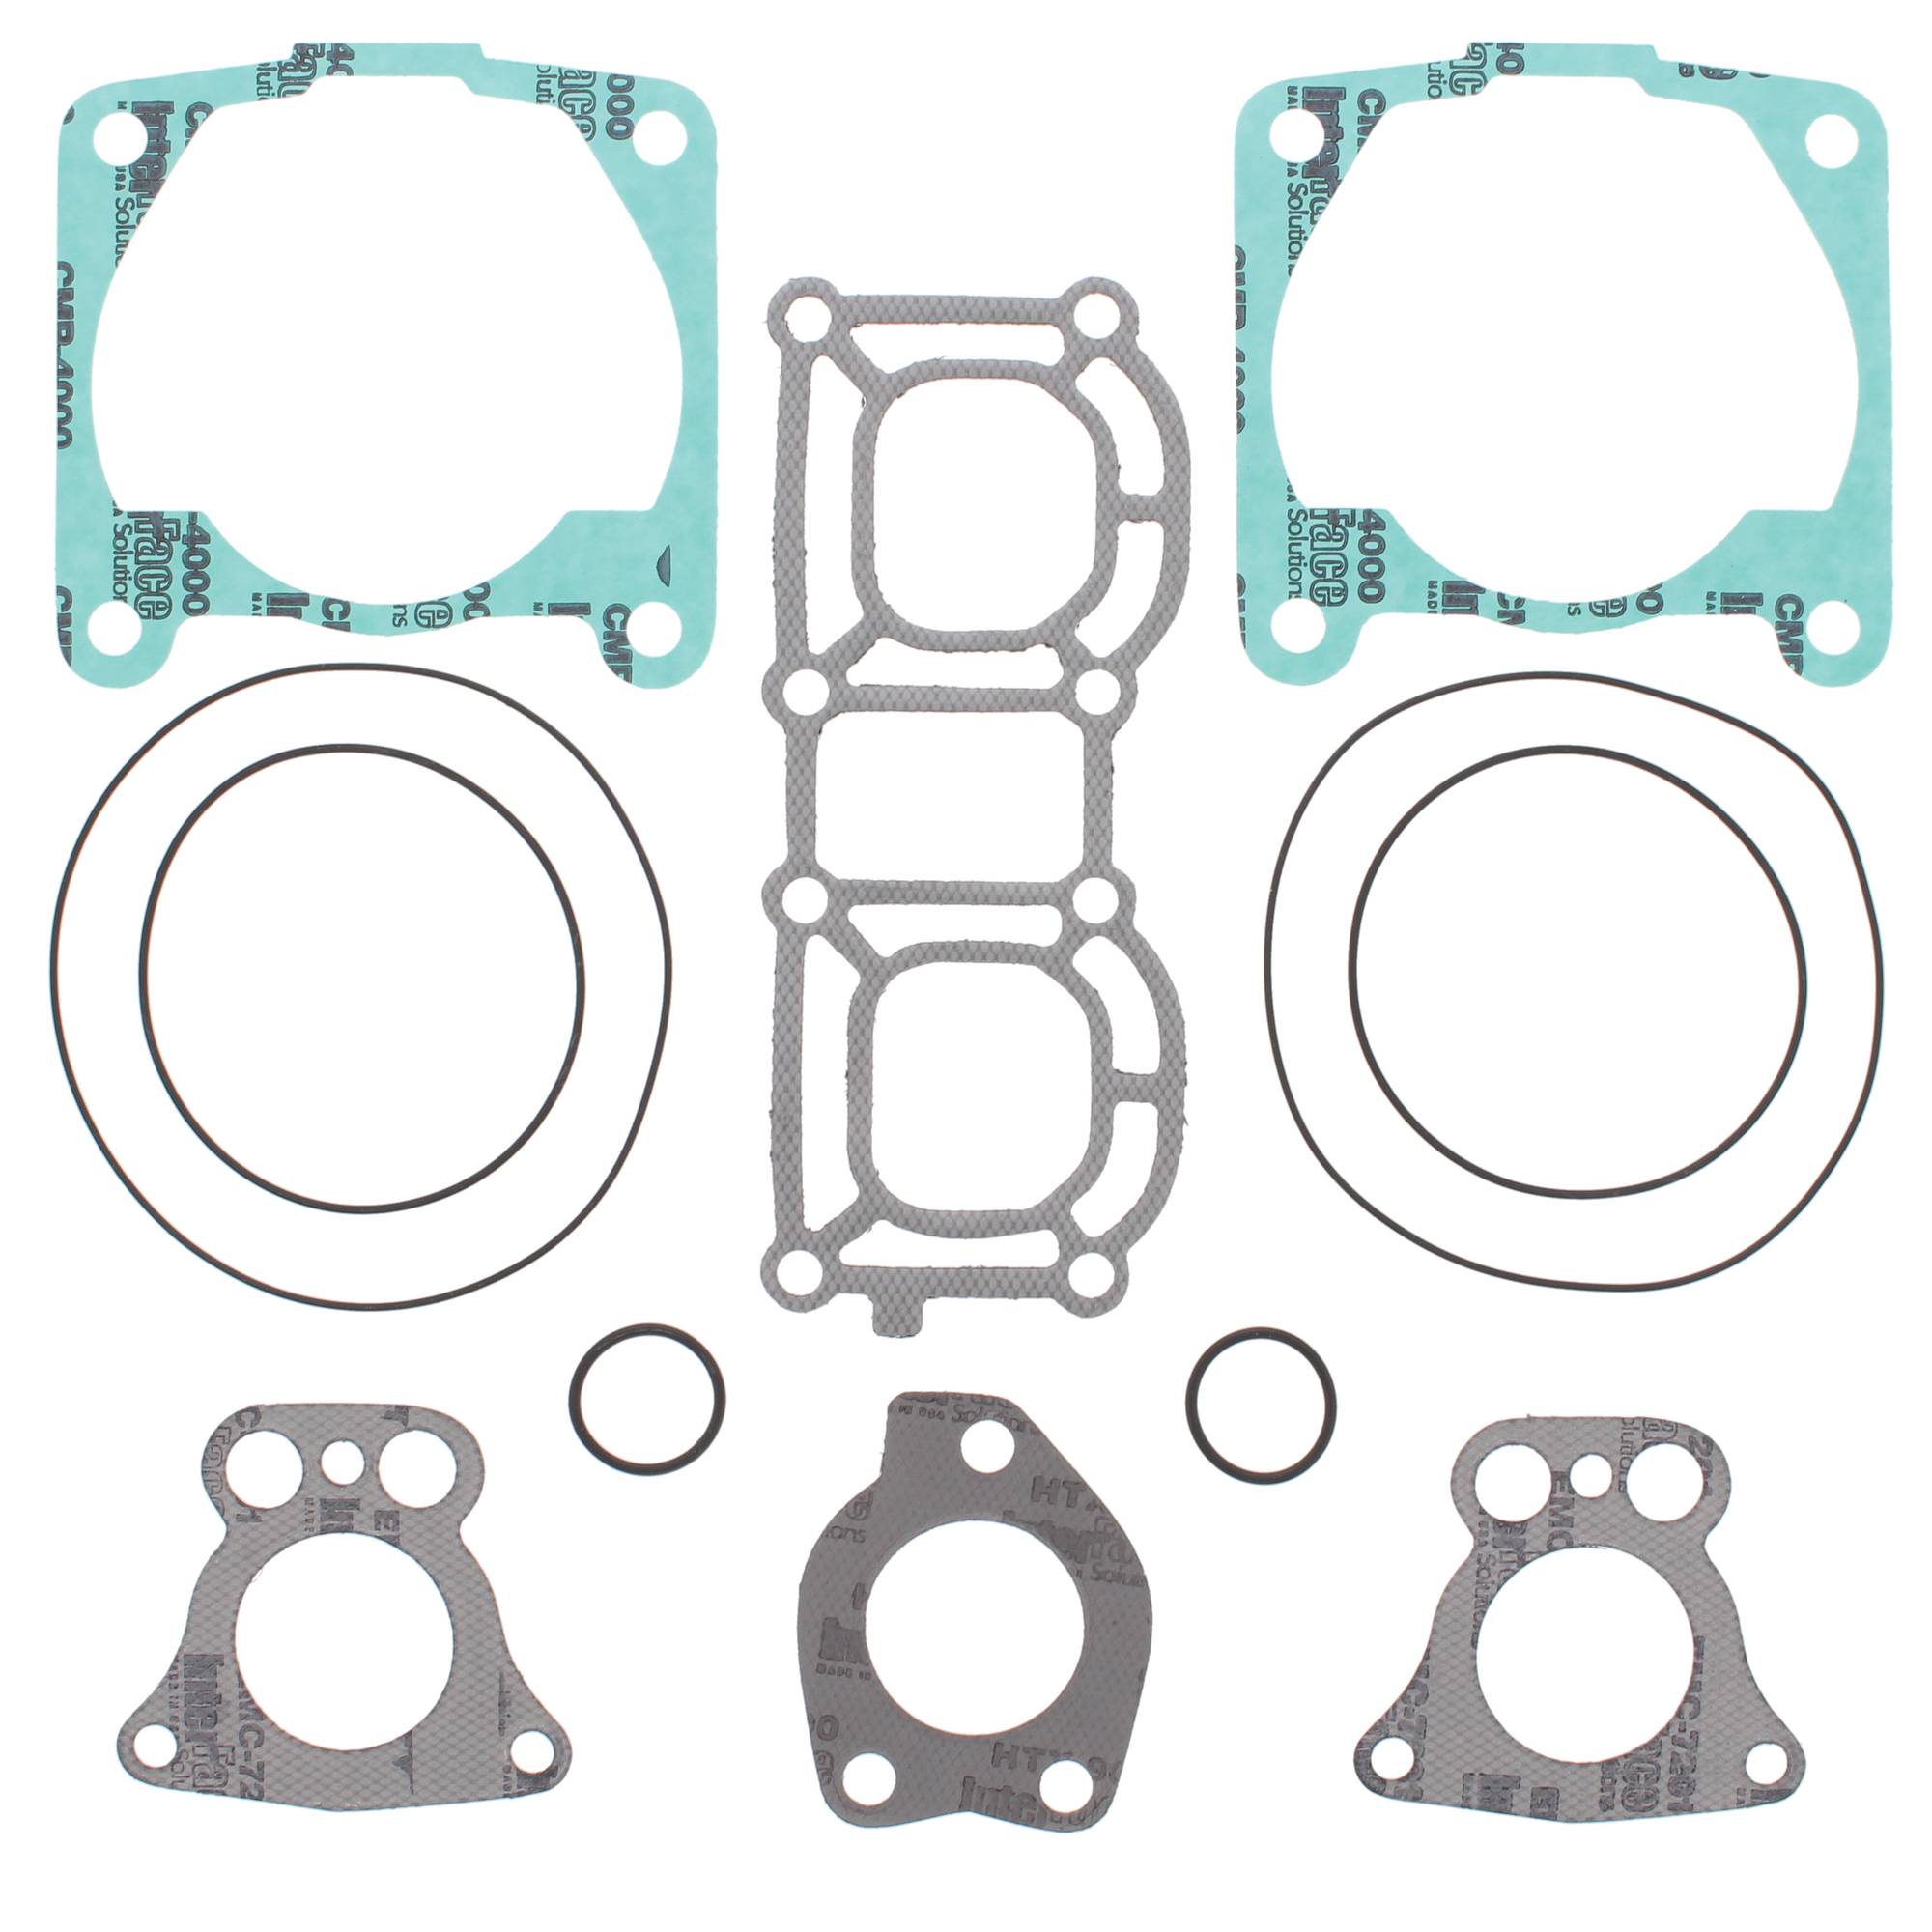 Vertex Top End Gasket Kit for Polaris Octane 777 Stand-up 02 03 04 - image 1 of 1